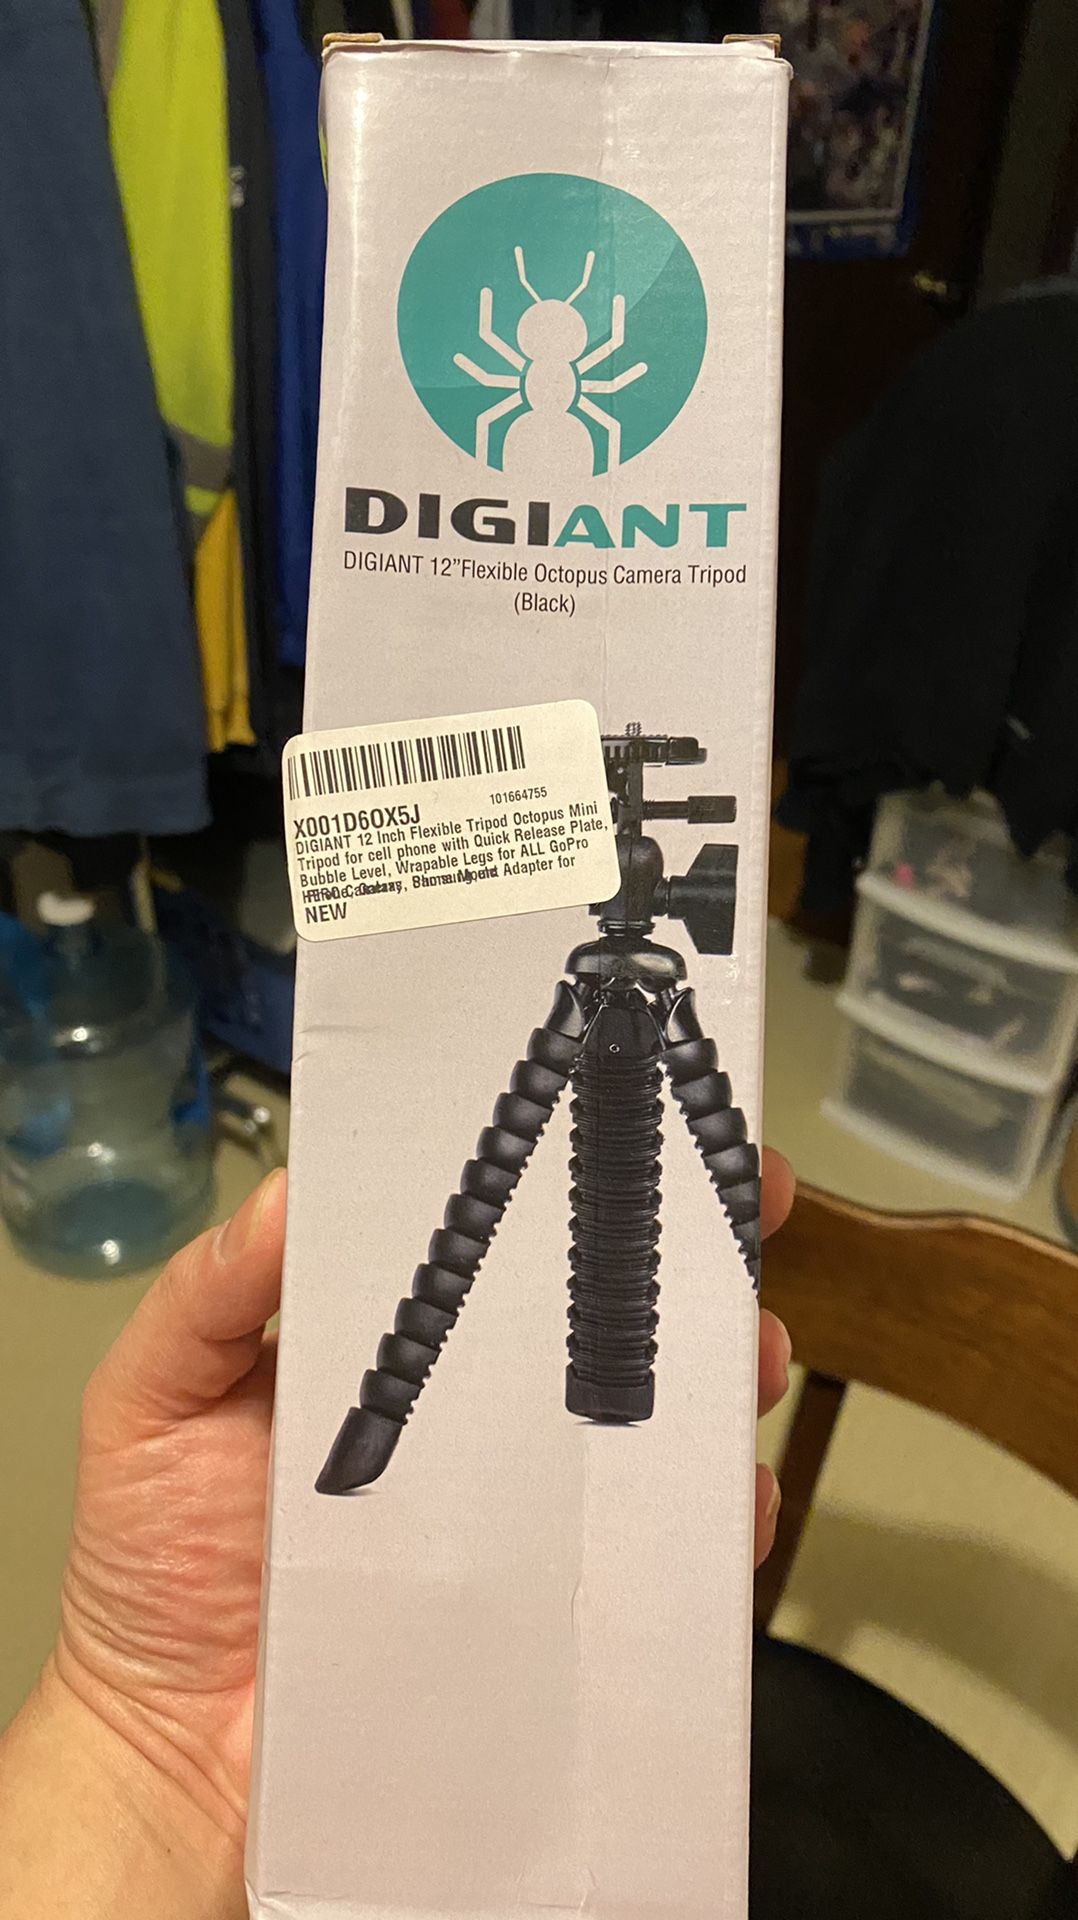 Digiant 12” Flexible tripod for cell phones. Works great.